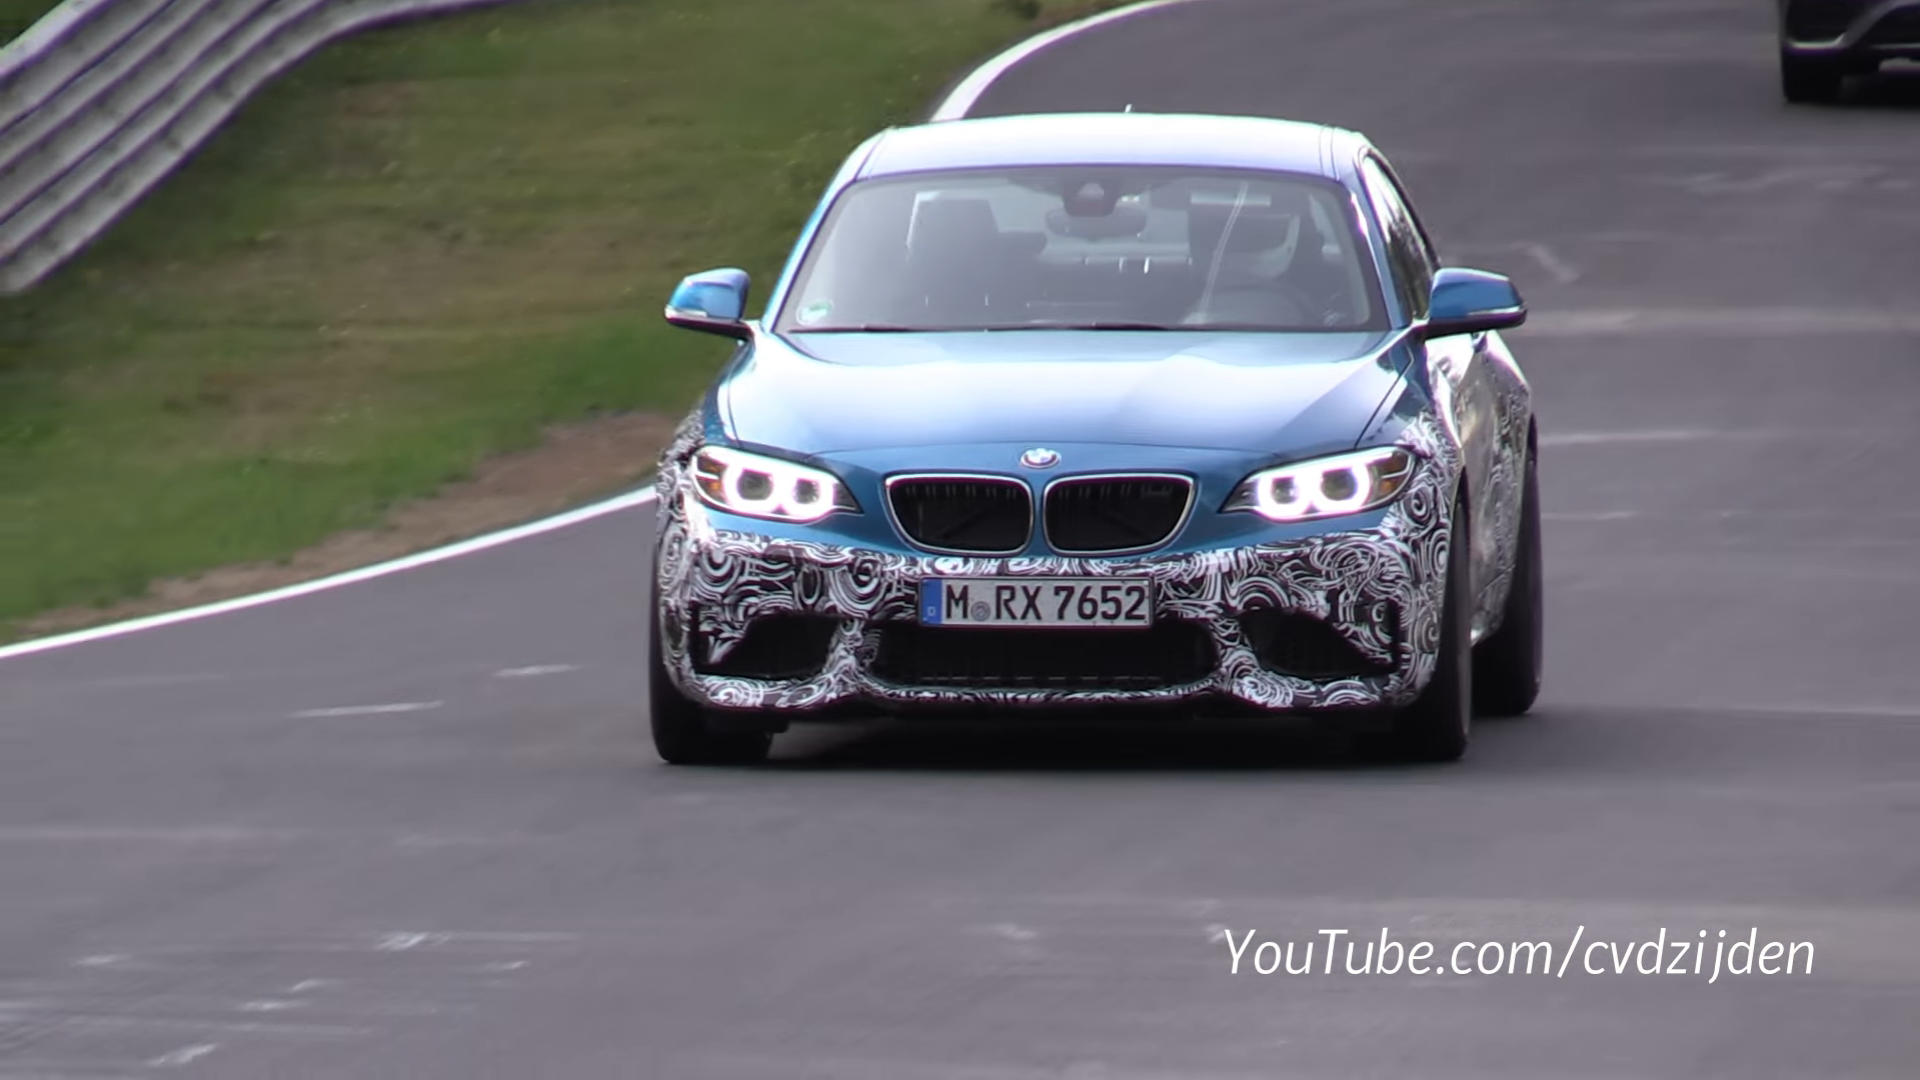 The 405-Horsepower BMW M2 CS Will be Limited to 1,000 Units, Report Says